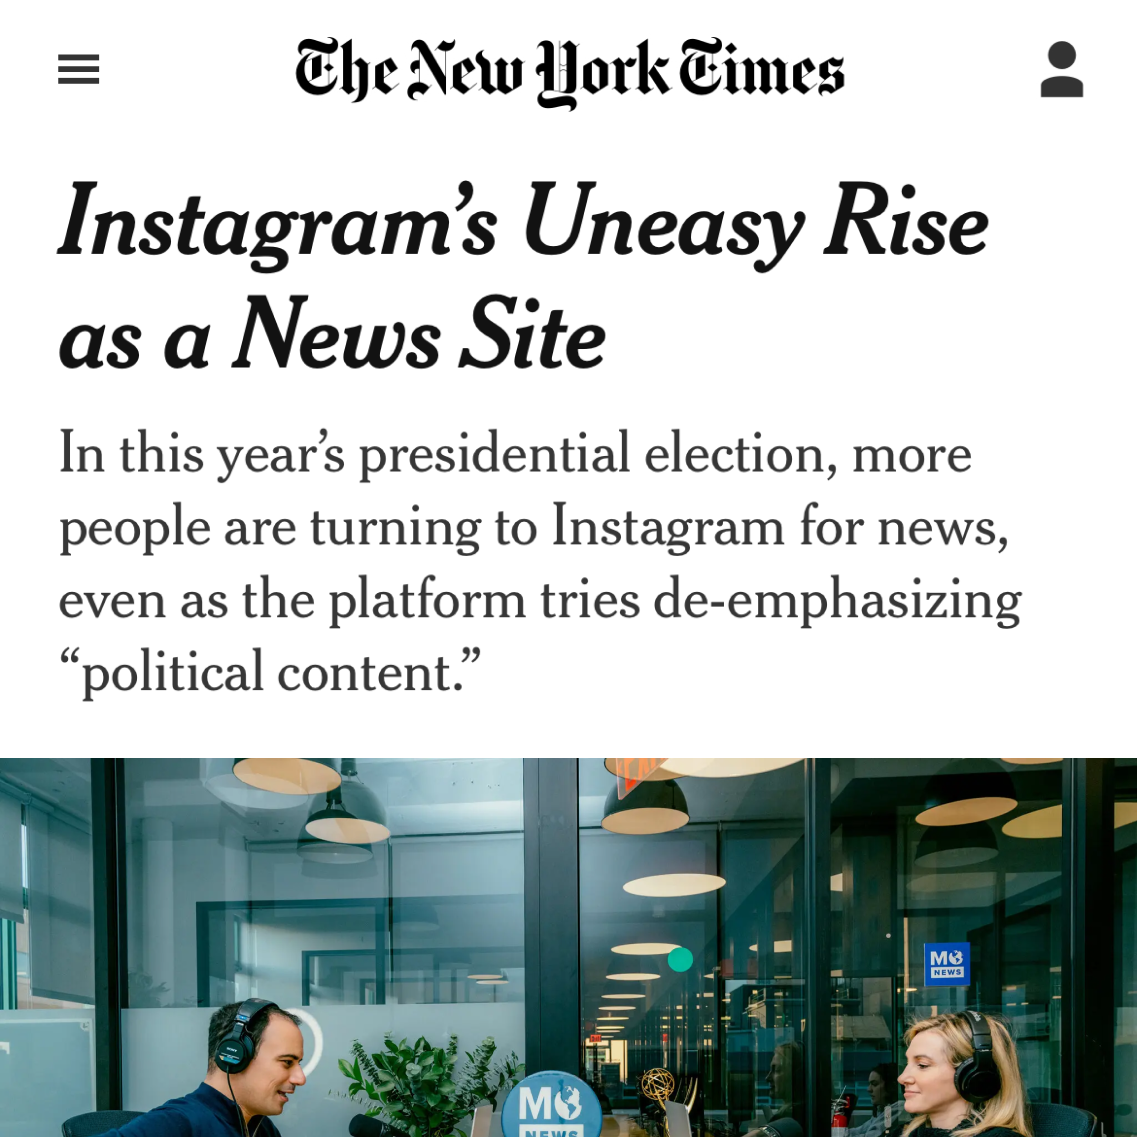 The New York Times features Mo News - "Instagram’s Uneasy Rise as a News Site".